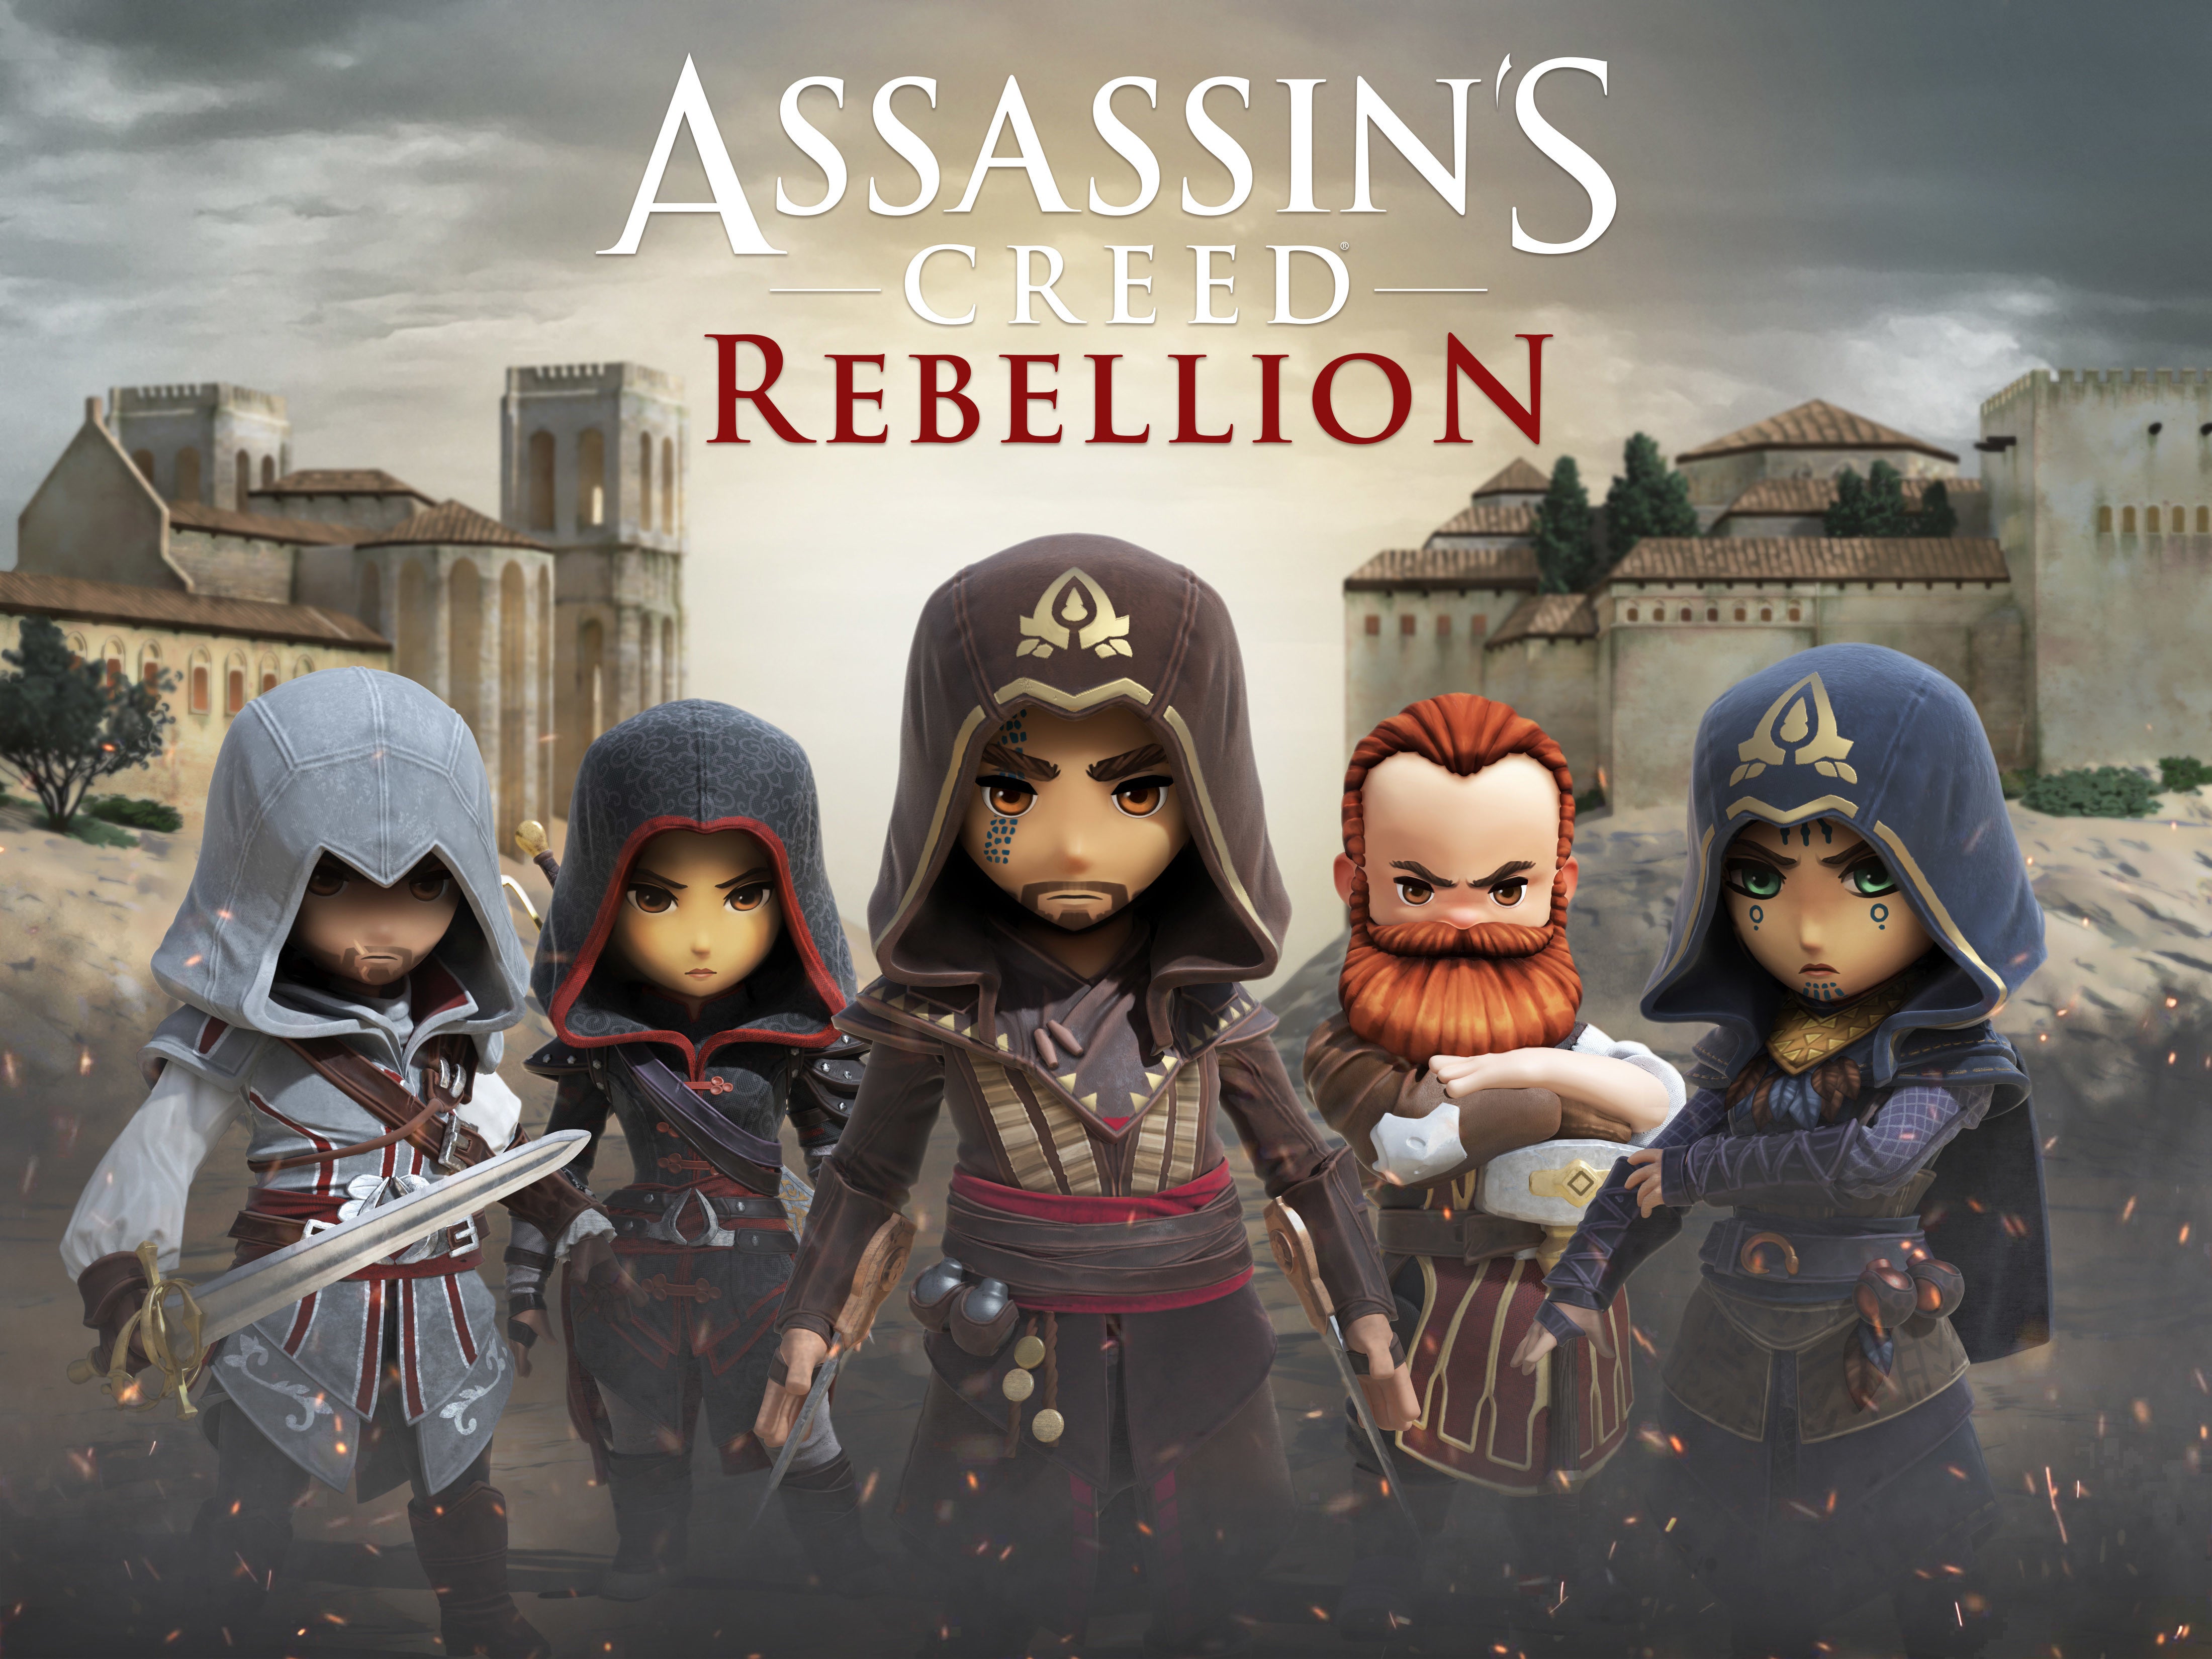 Ubisoft announces Assassin's Creed Rebellion for Android and iOS